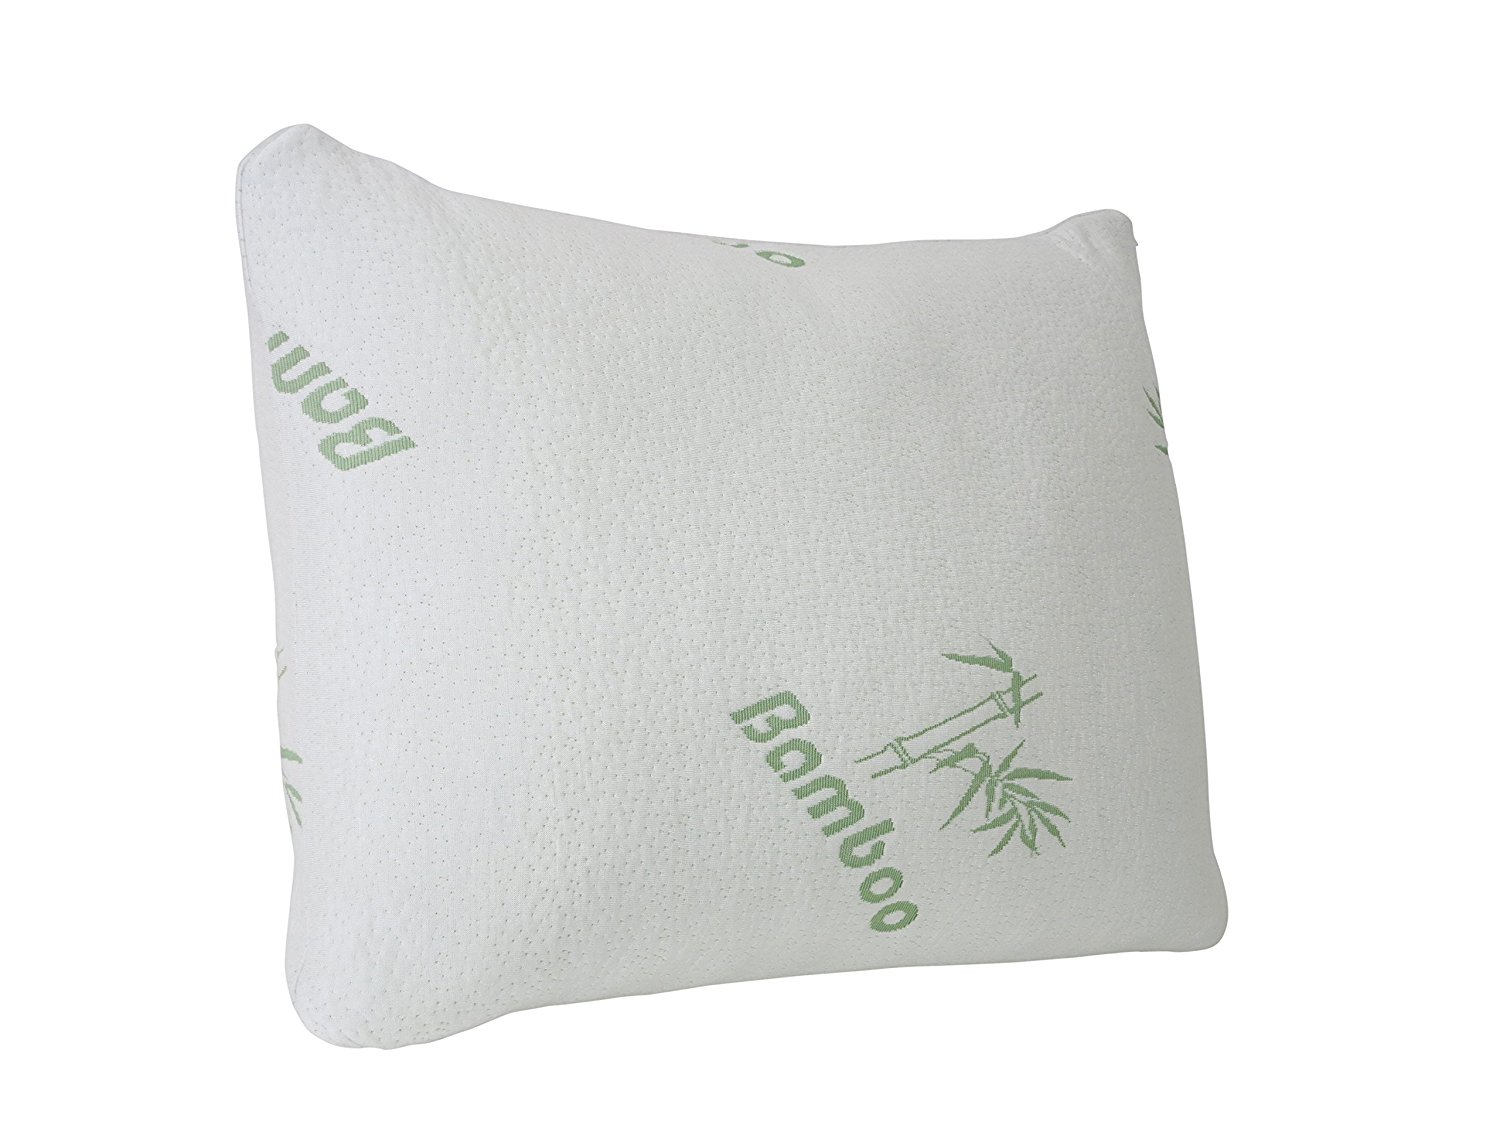 Plixio King Size Shredded Cooling Memory Foam Bamboo Pillow